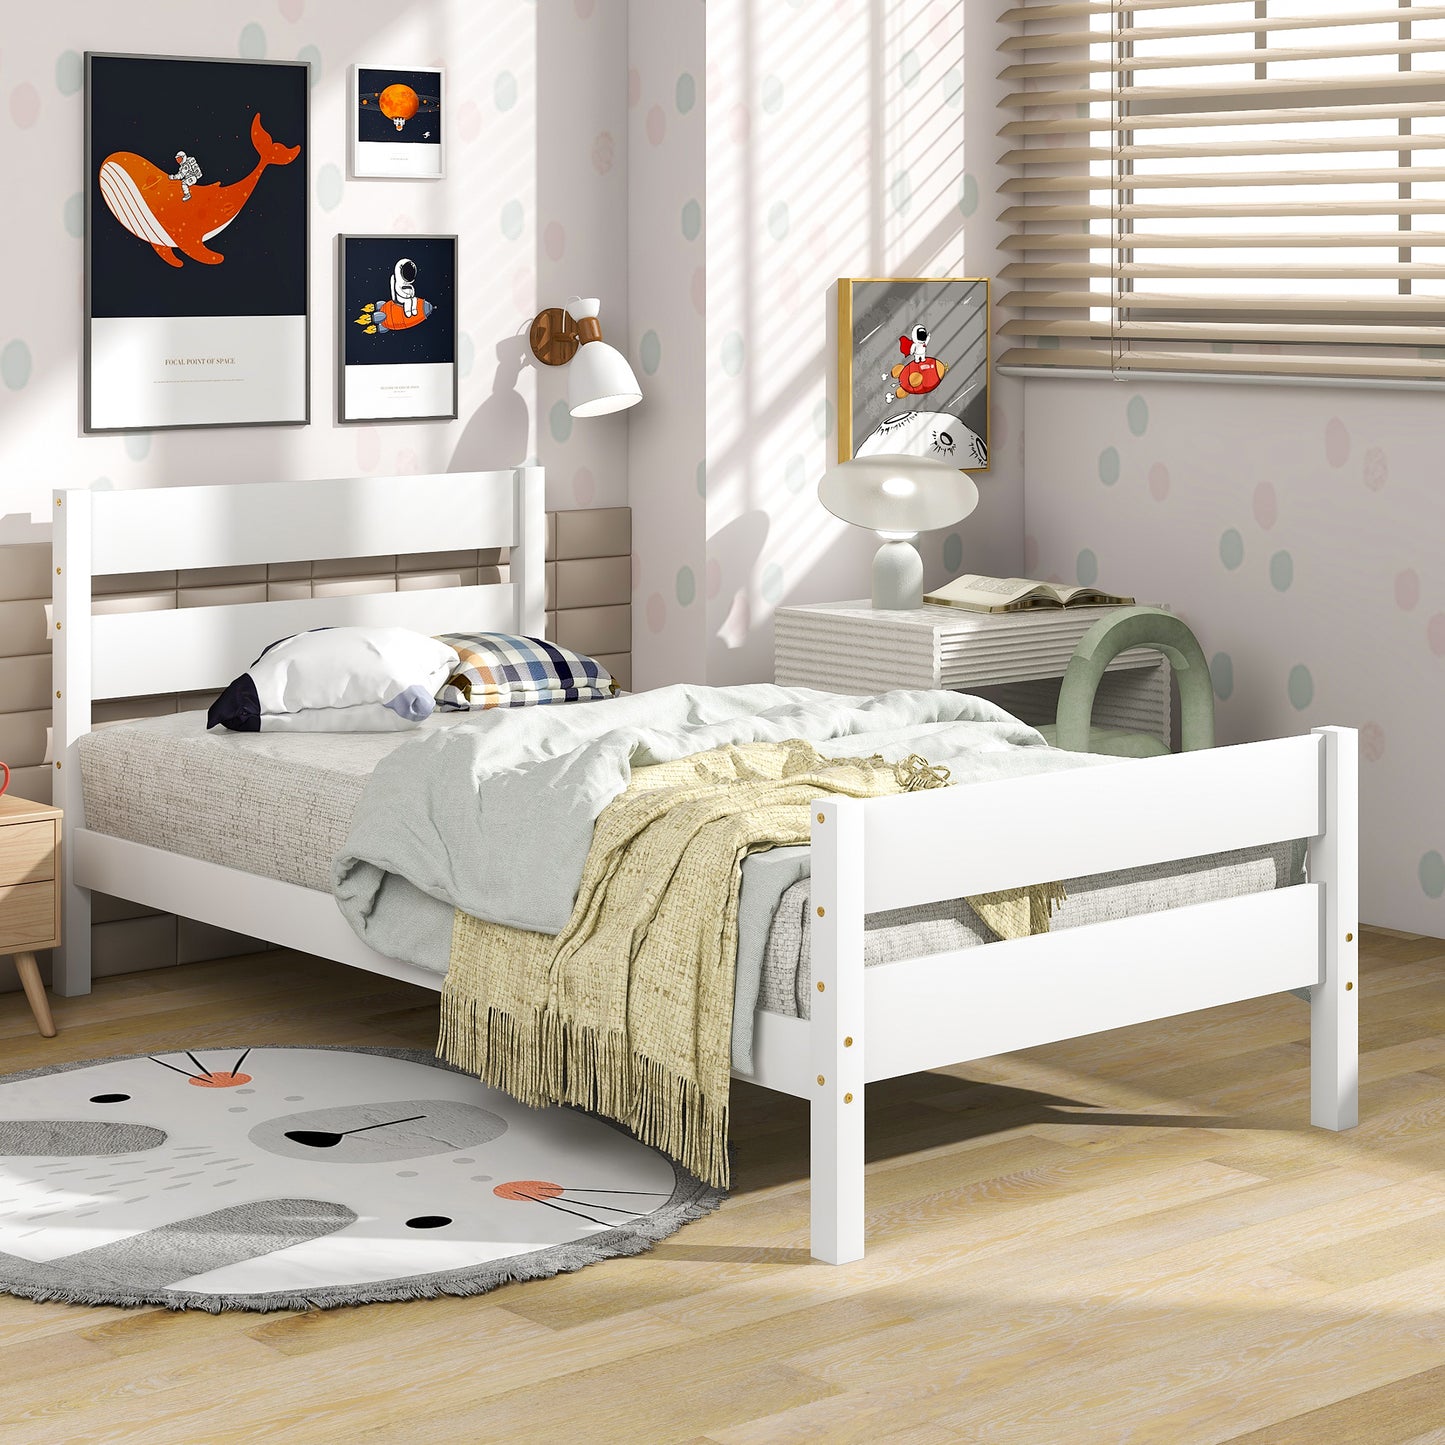 Wood Twin Platform Bed Frame with Headboard and Footboard for Kids Boys Girls Teens Adults, White, LJ798